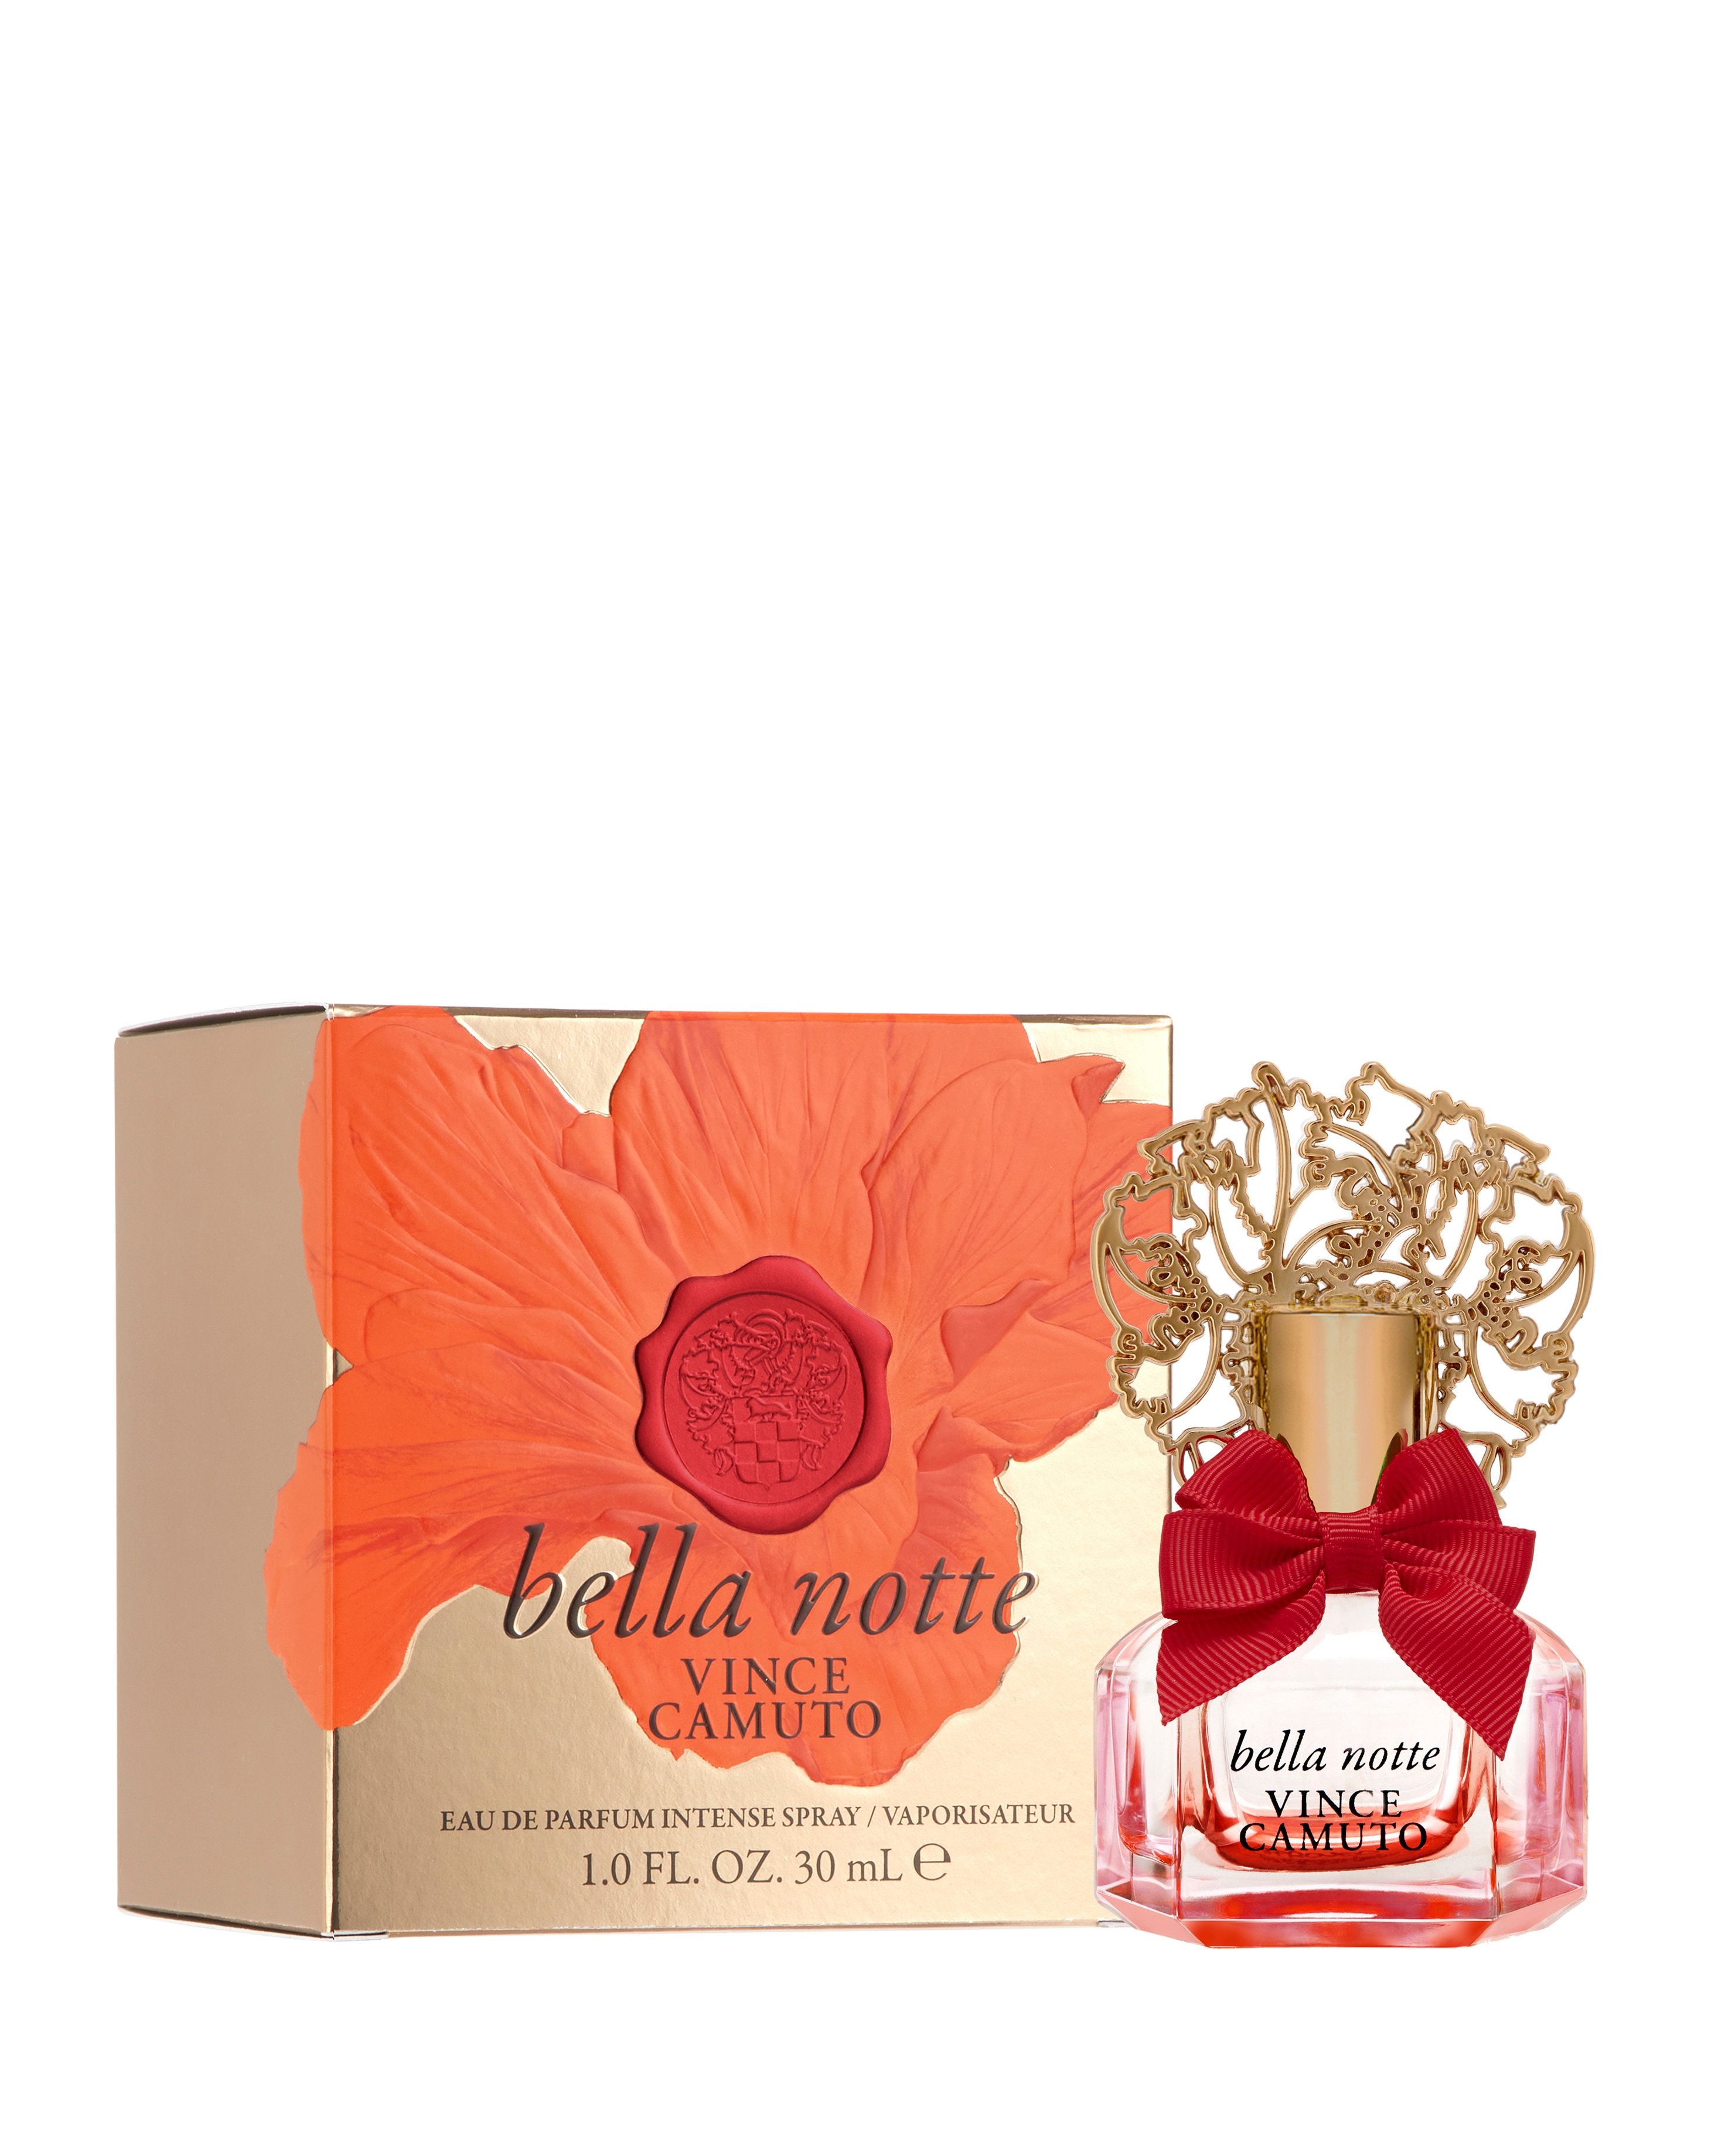 Vince Camuto Bella 3.4 EDP for women